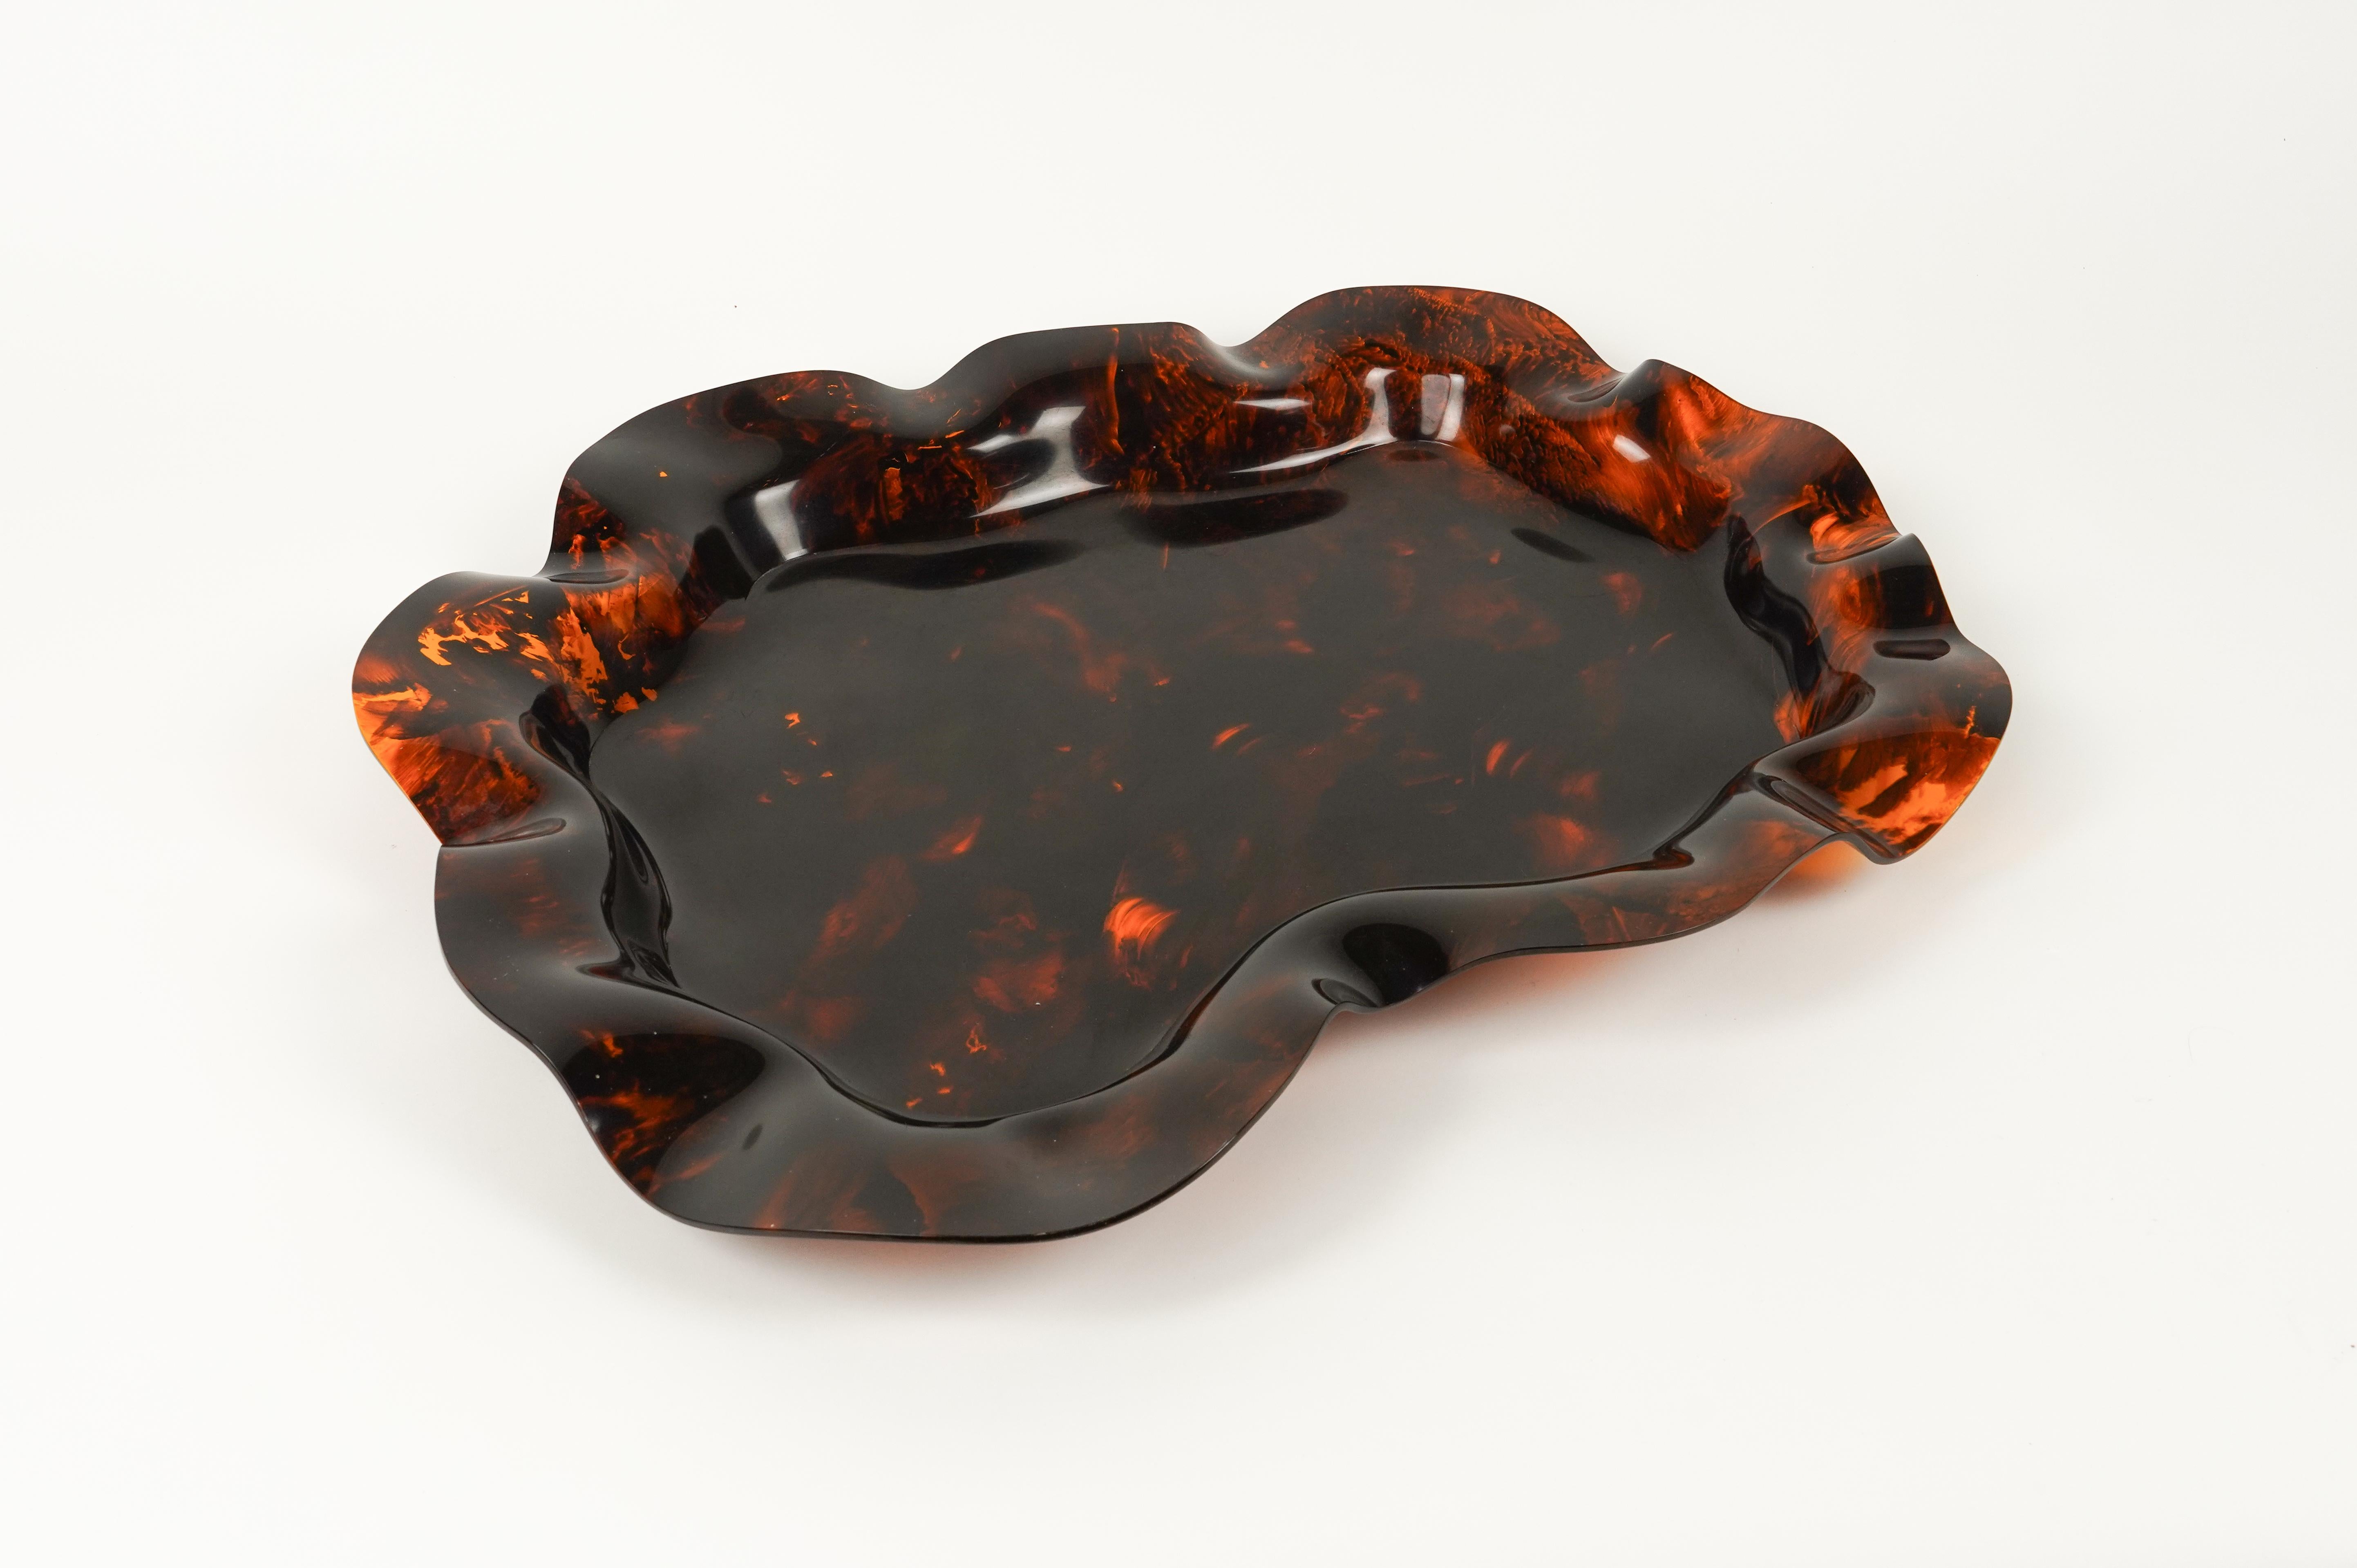 Large Serving Tray or Centerpiece Lucite Faux Tortoiseshell, Italy 1970s For Sale 3